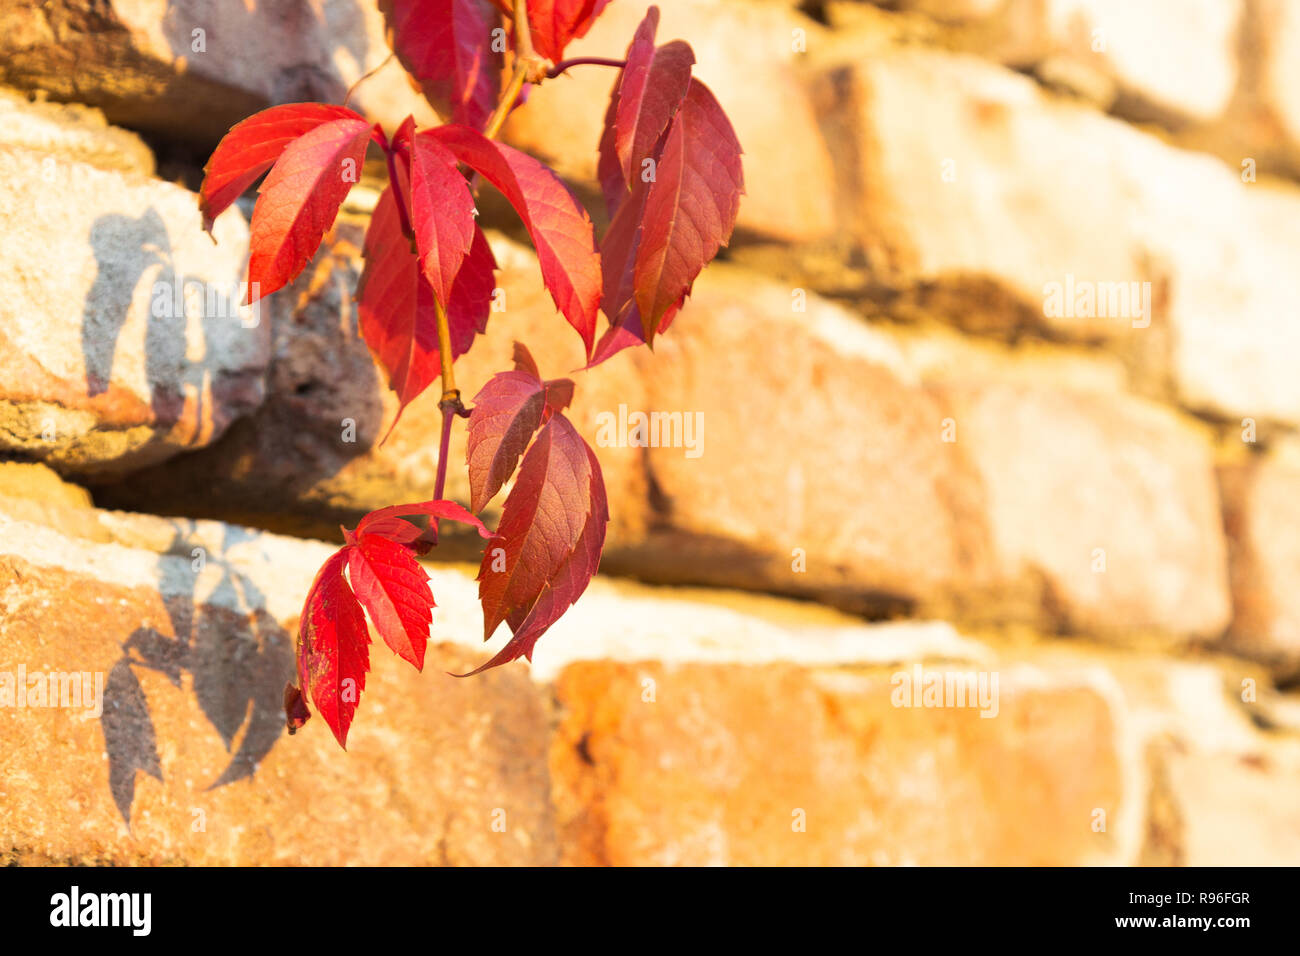 Thicket creeper (Parthenocissus vitacea) shoot with red leaves hanging on a brick-wall in autumn / fall. Shot before sunset in orange color sunlight.  Stock Photo